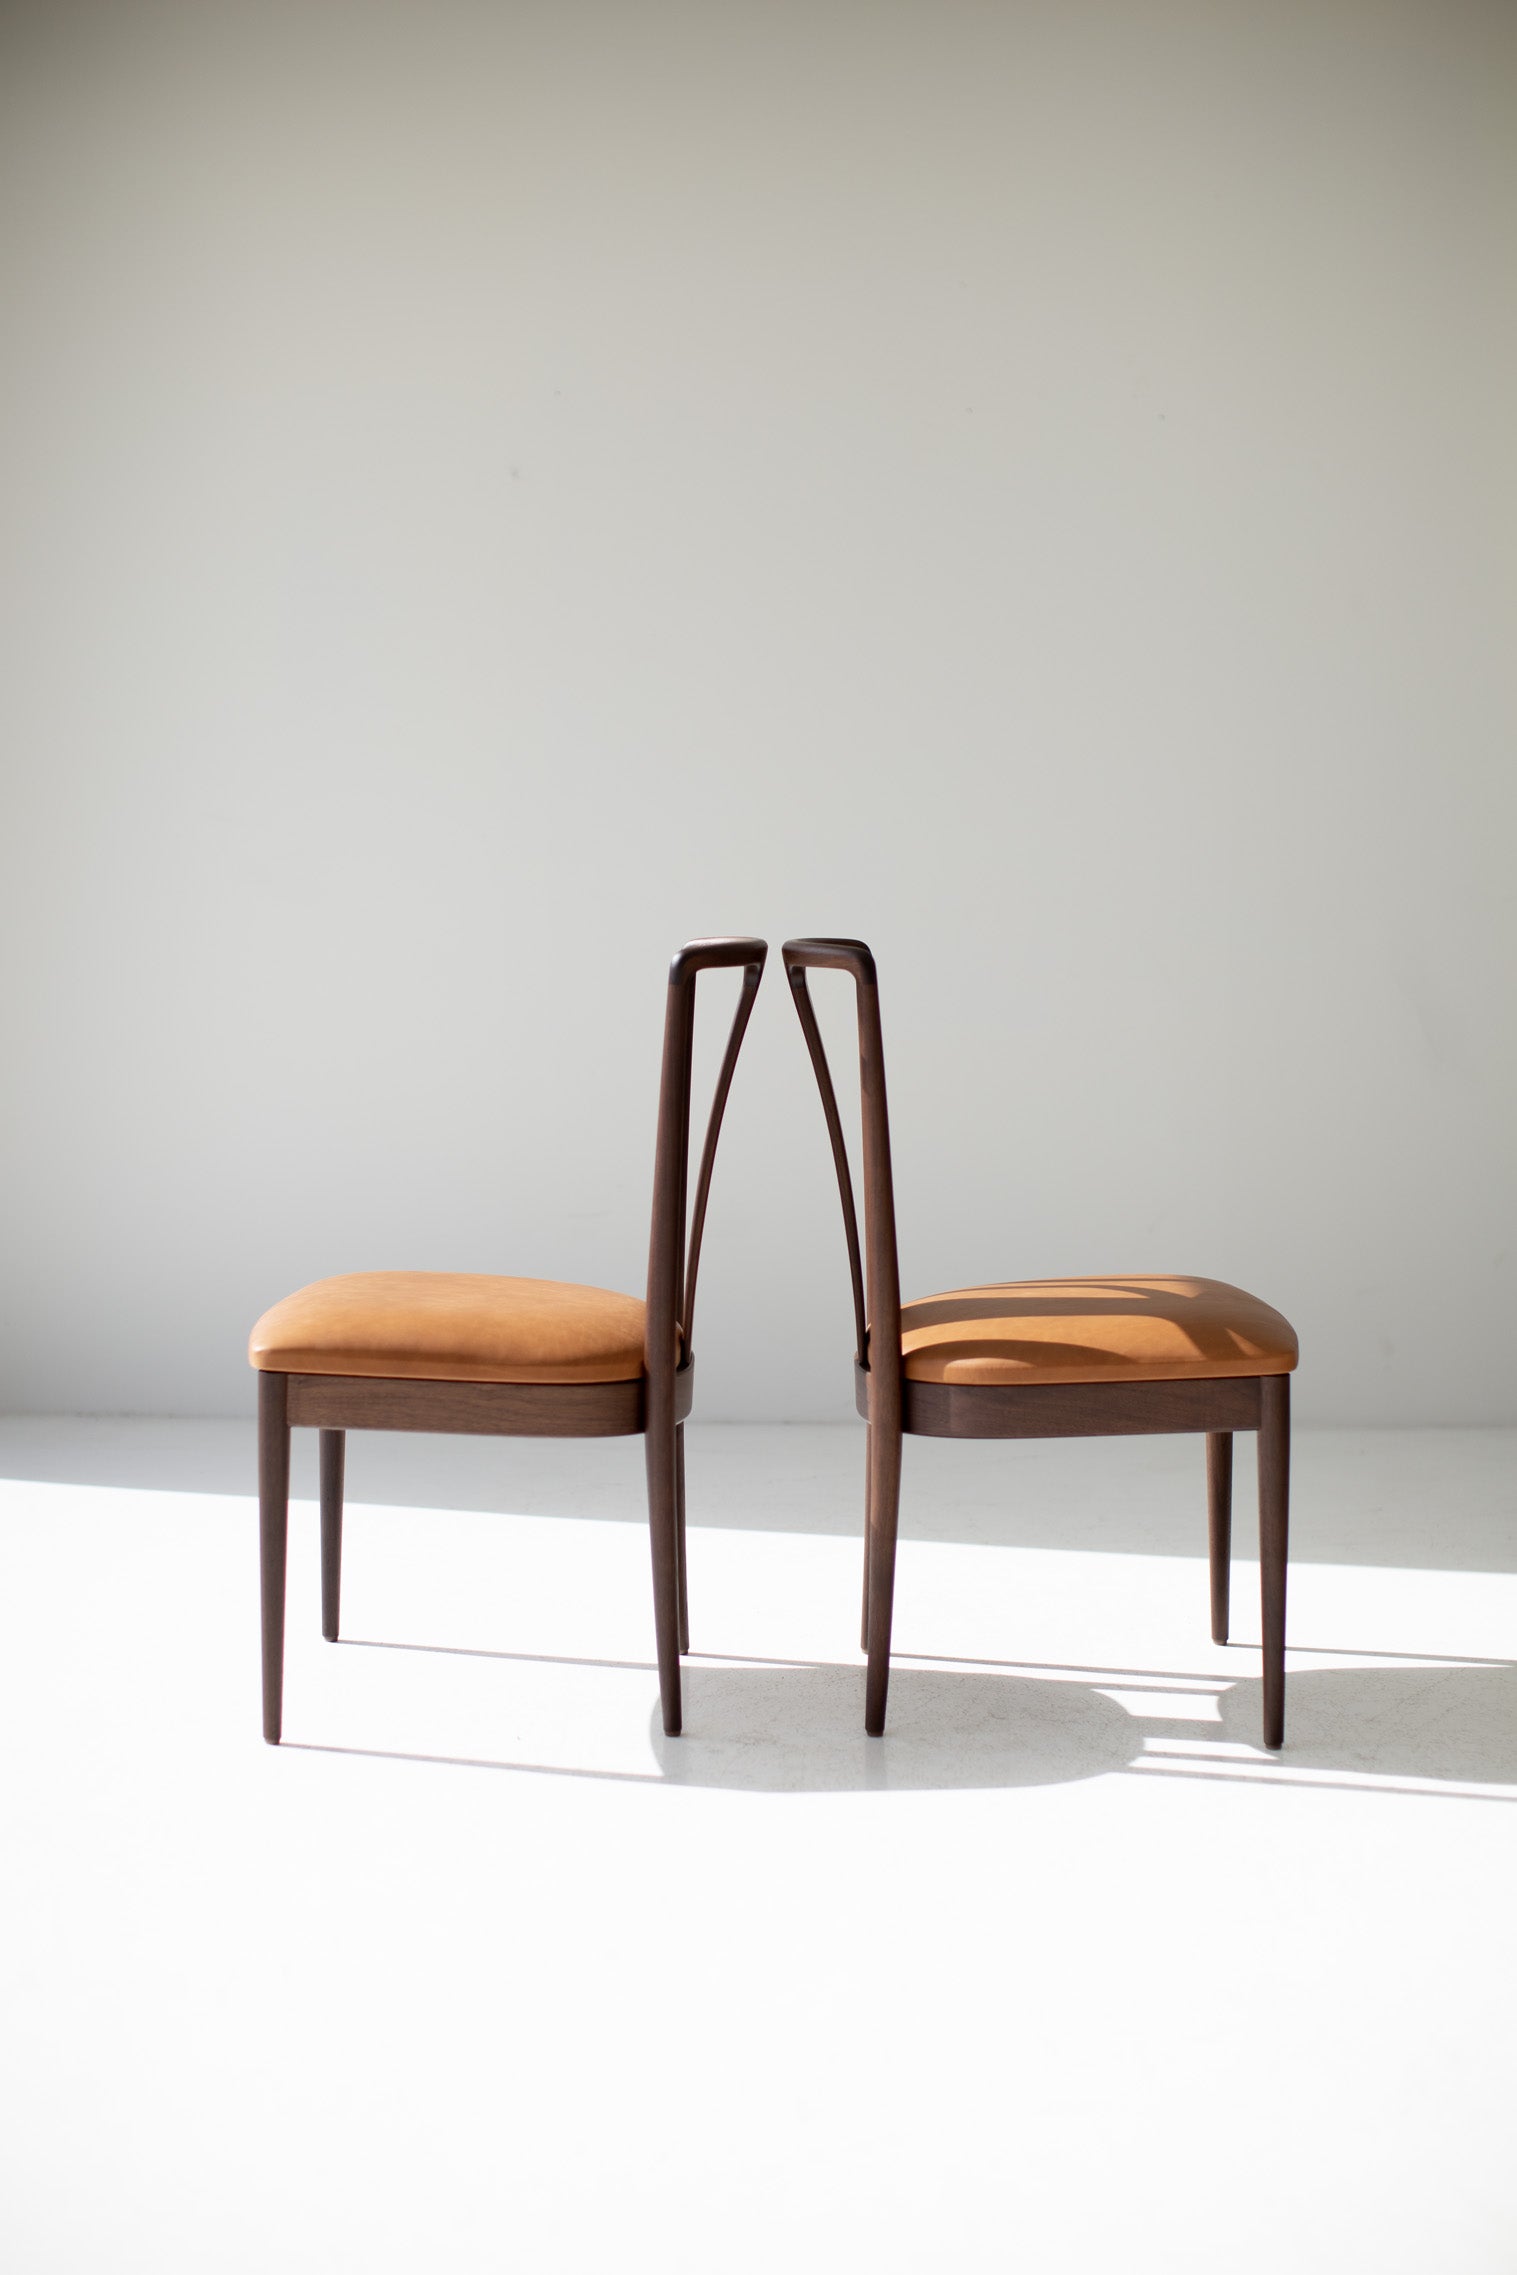 Modern Wood Dining Side Chair by Lawrence Peabody : The Derby Chair